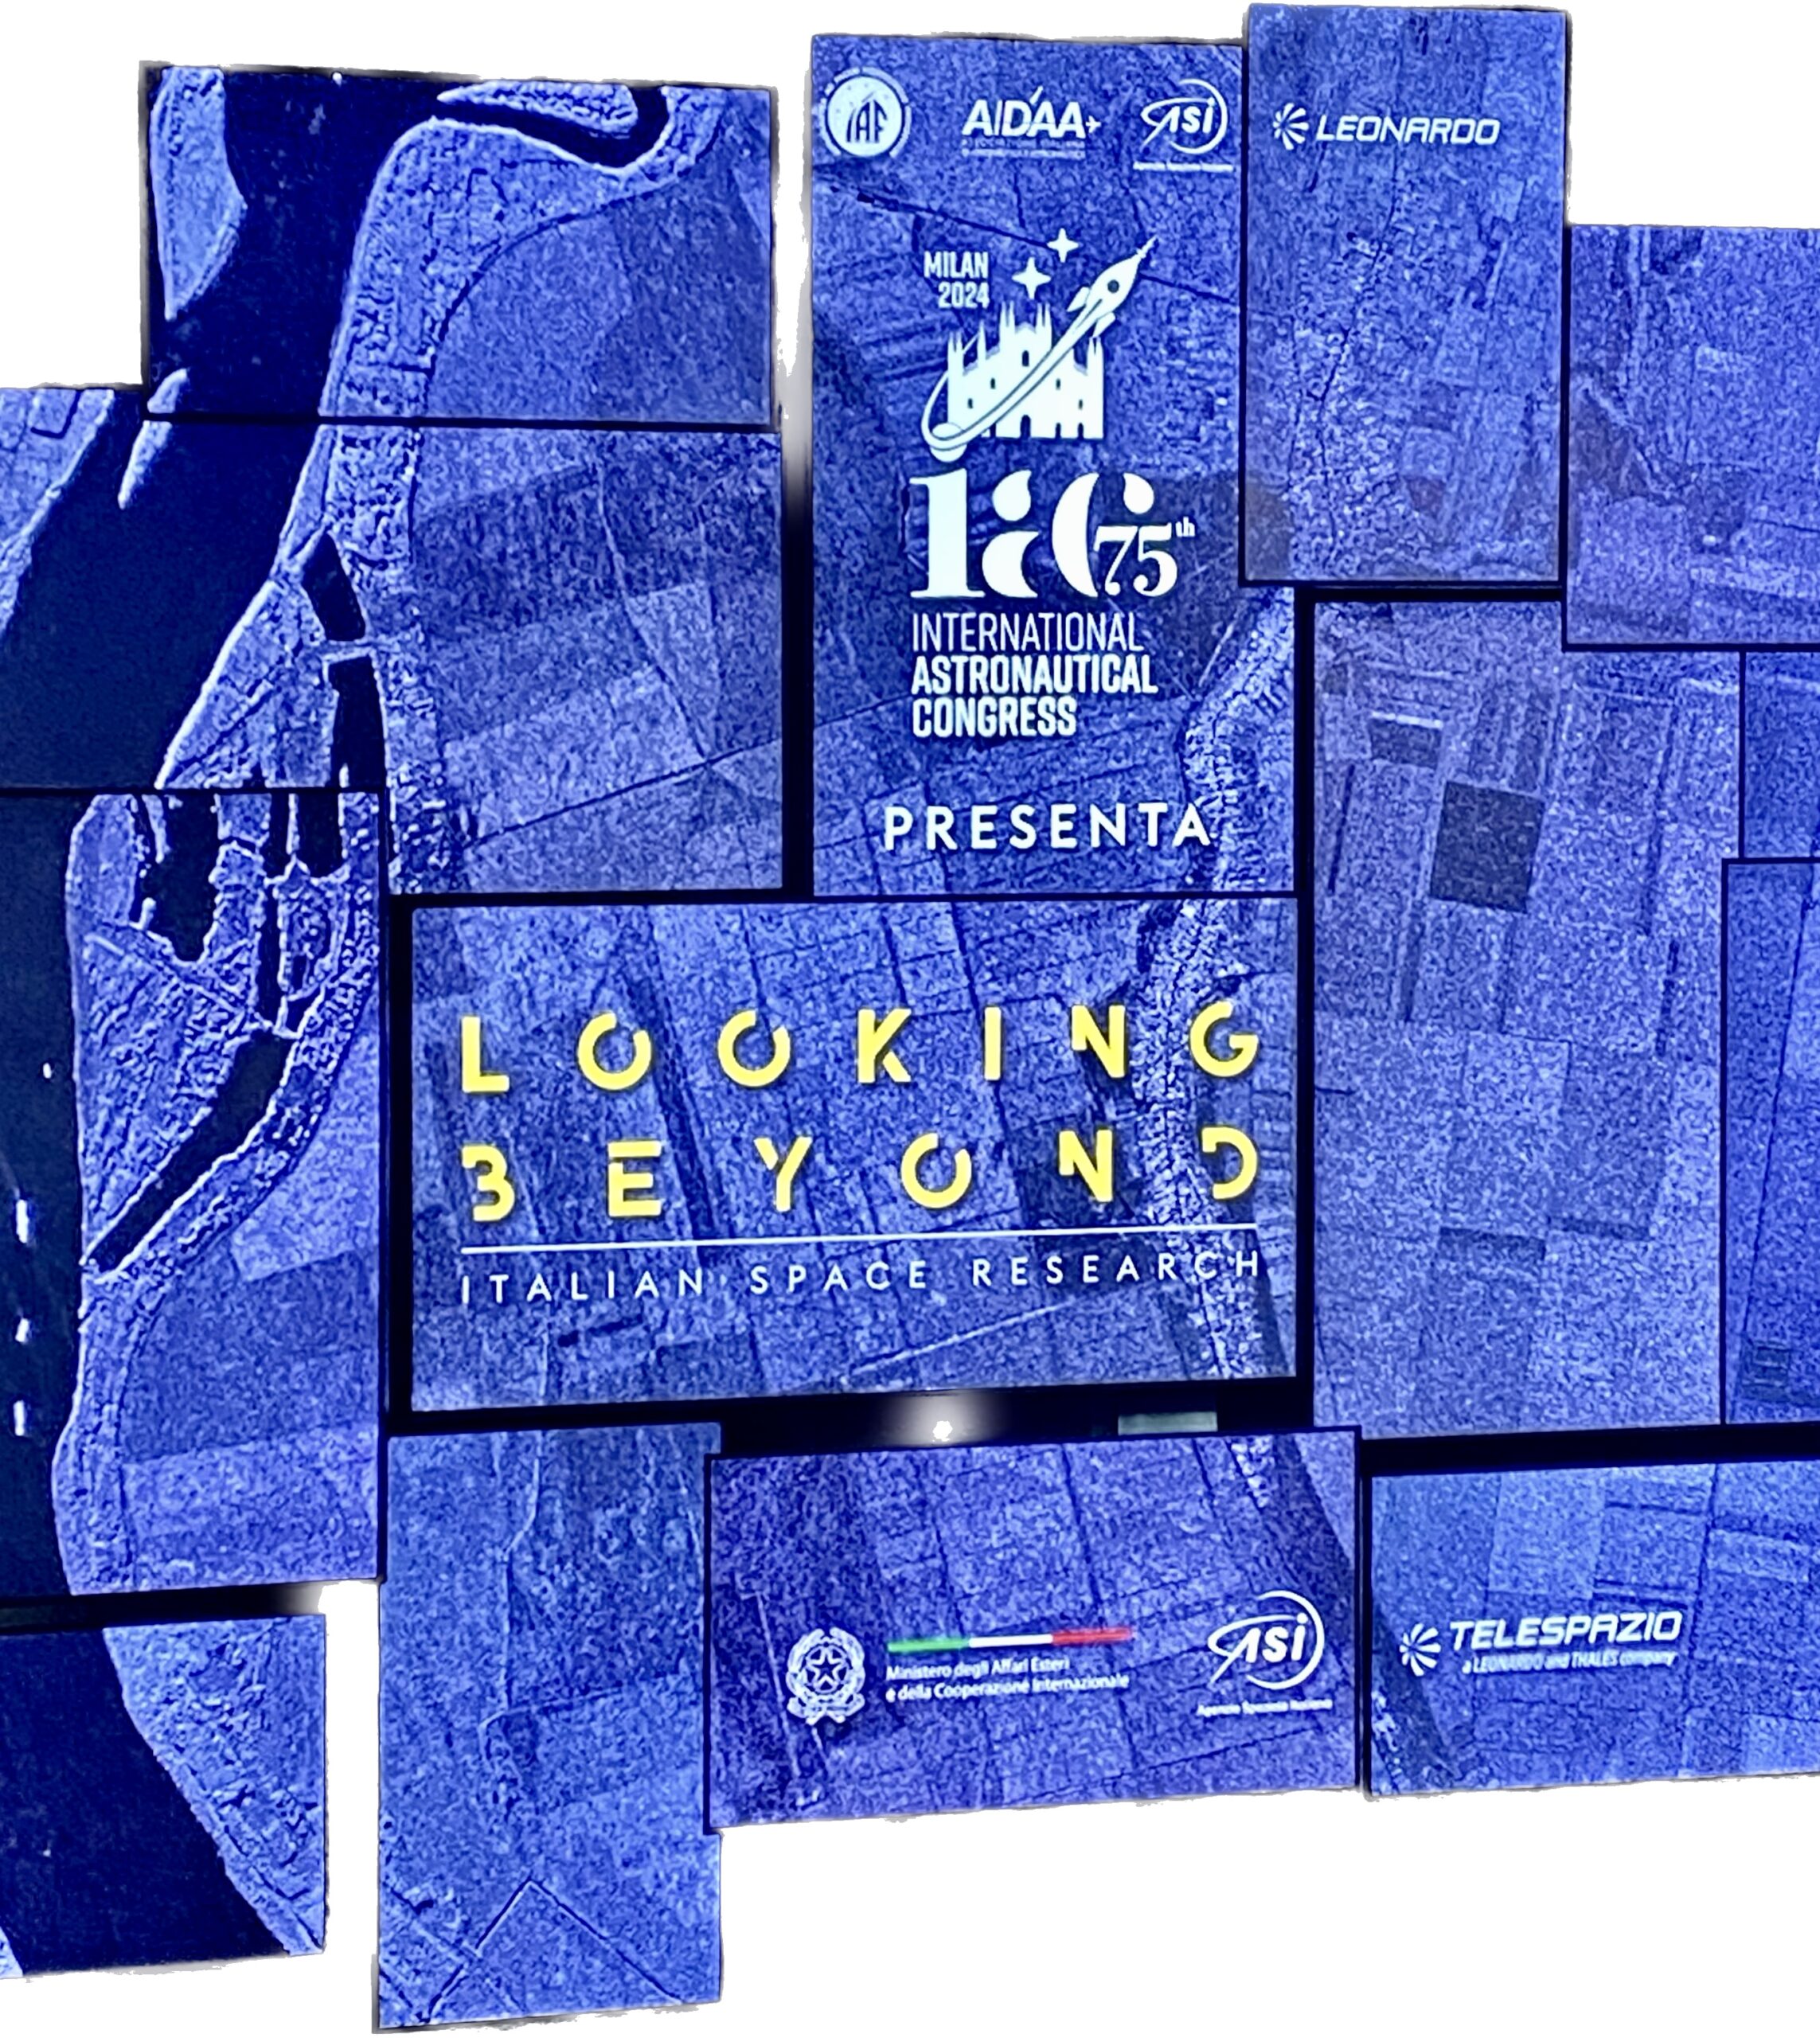 PoliMi at Looking Beyond